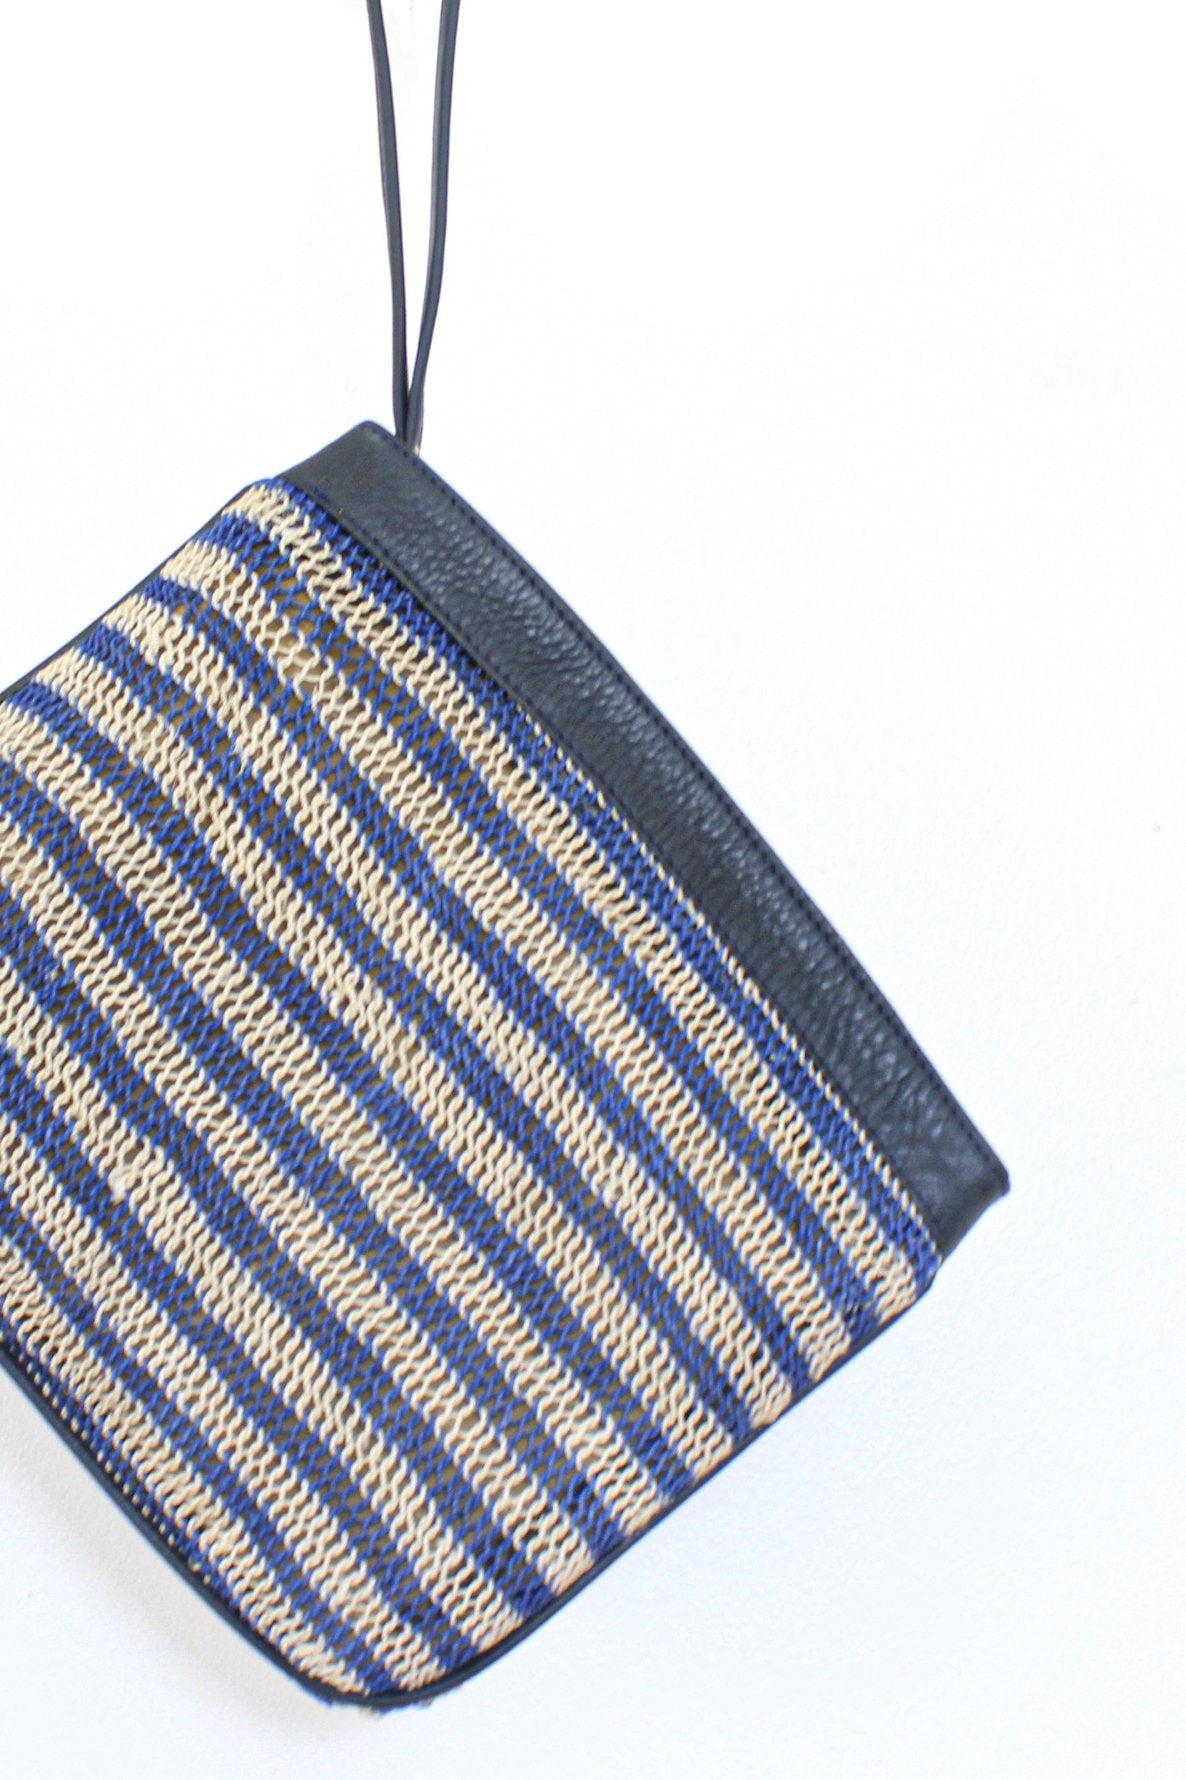 Natural White and Blue Striped Clutch bag with Blue Leather Trim and Strap.